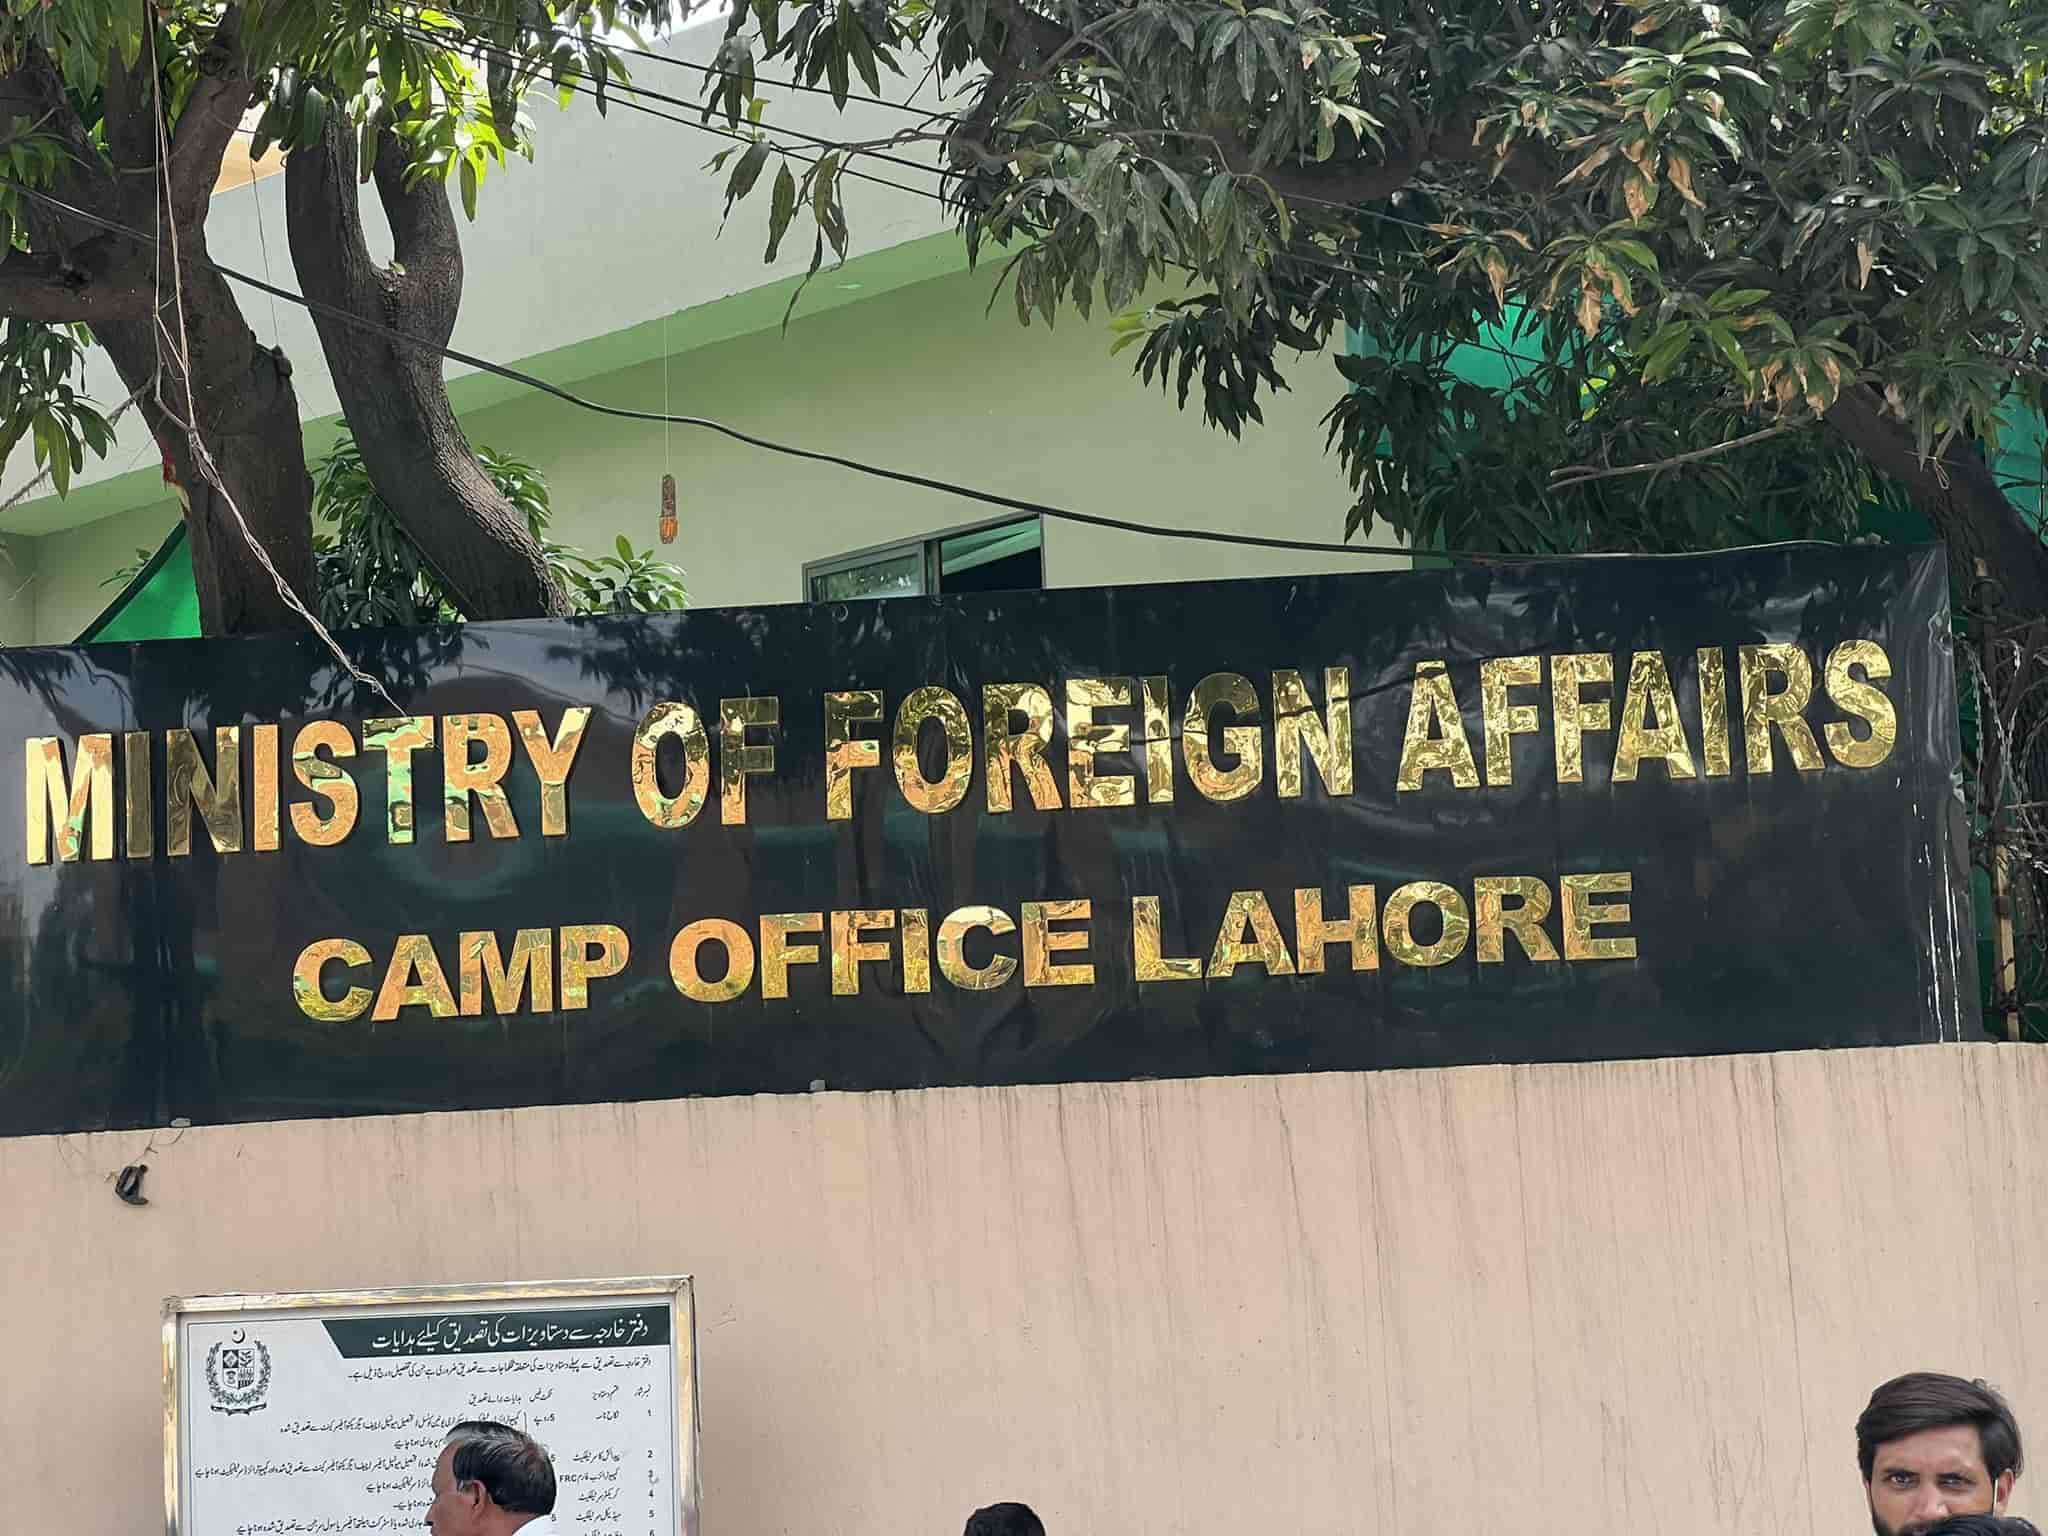 Lahore MOFA Office Wallpaper (Ministry OF Forgan Afire Office)